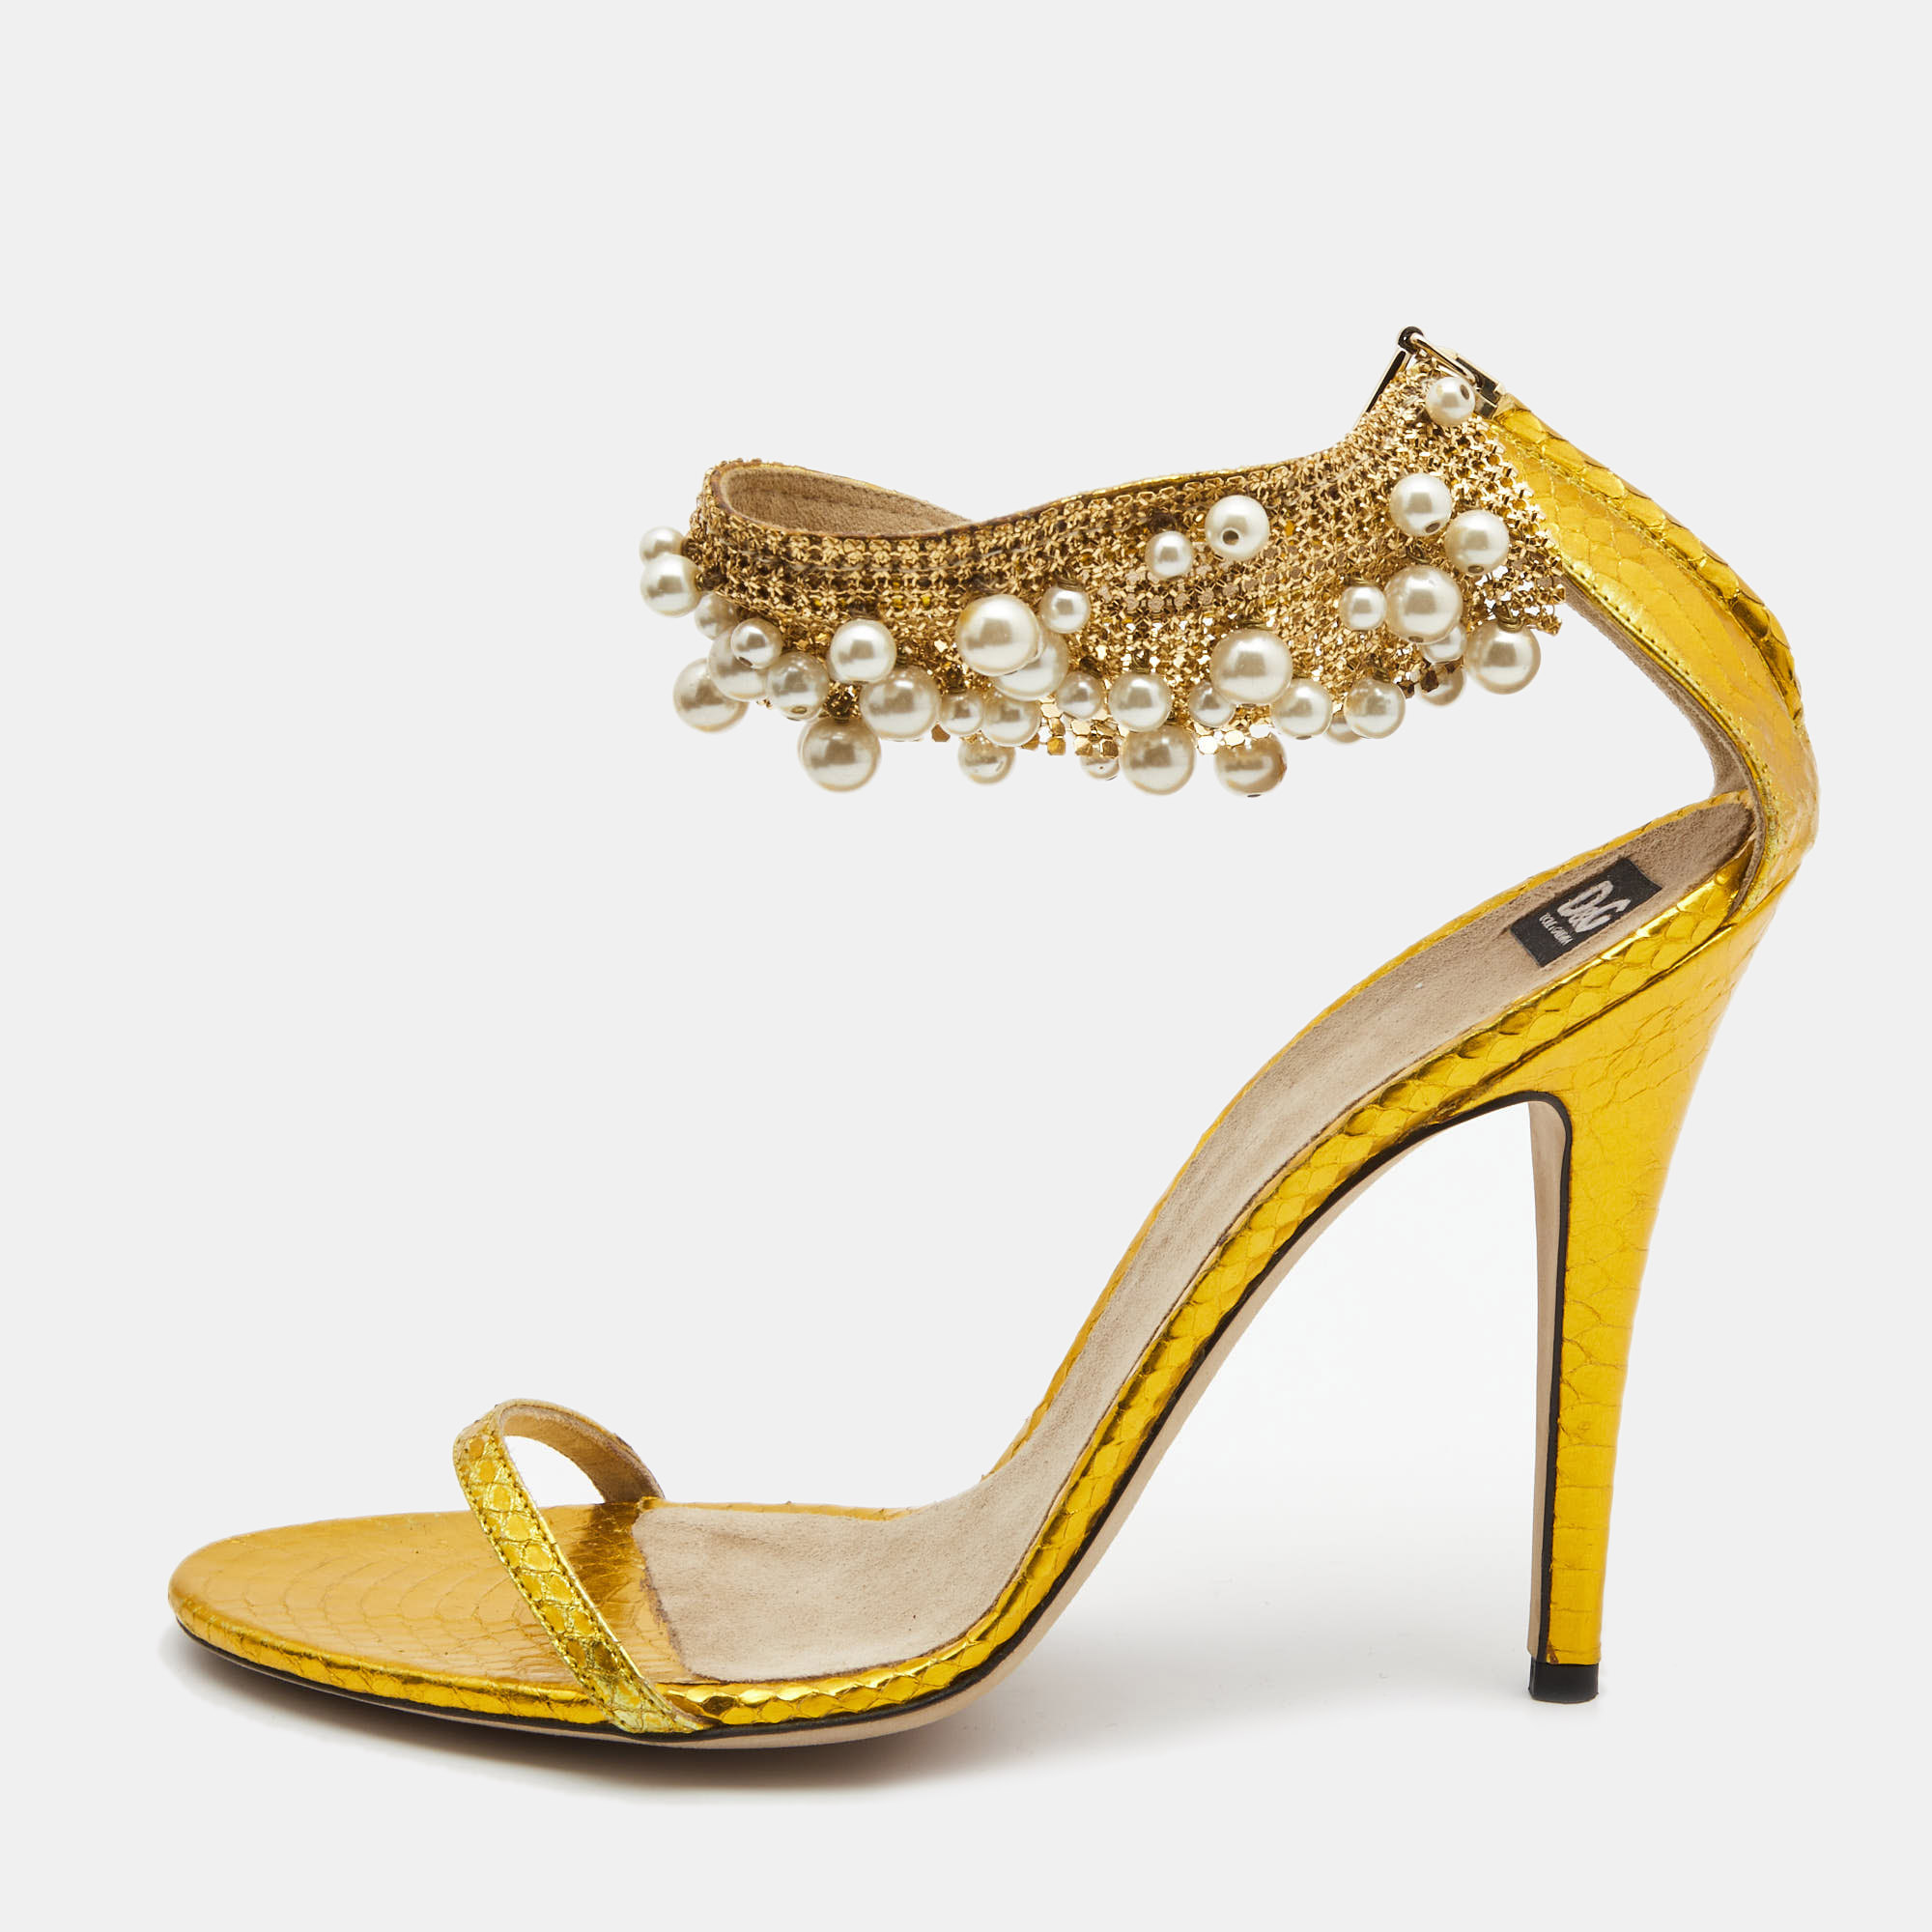 Pre-owned Dolce & Gabbana Metallic Yellow Python Embossed Leather Embellished Ankle Strap Sandals Size 40